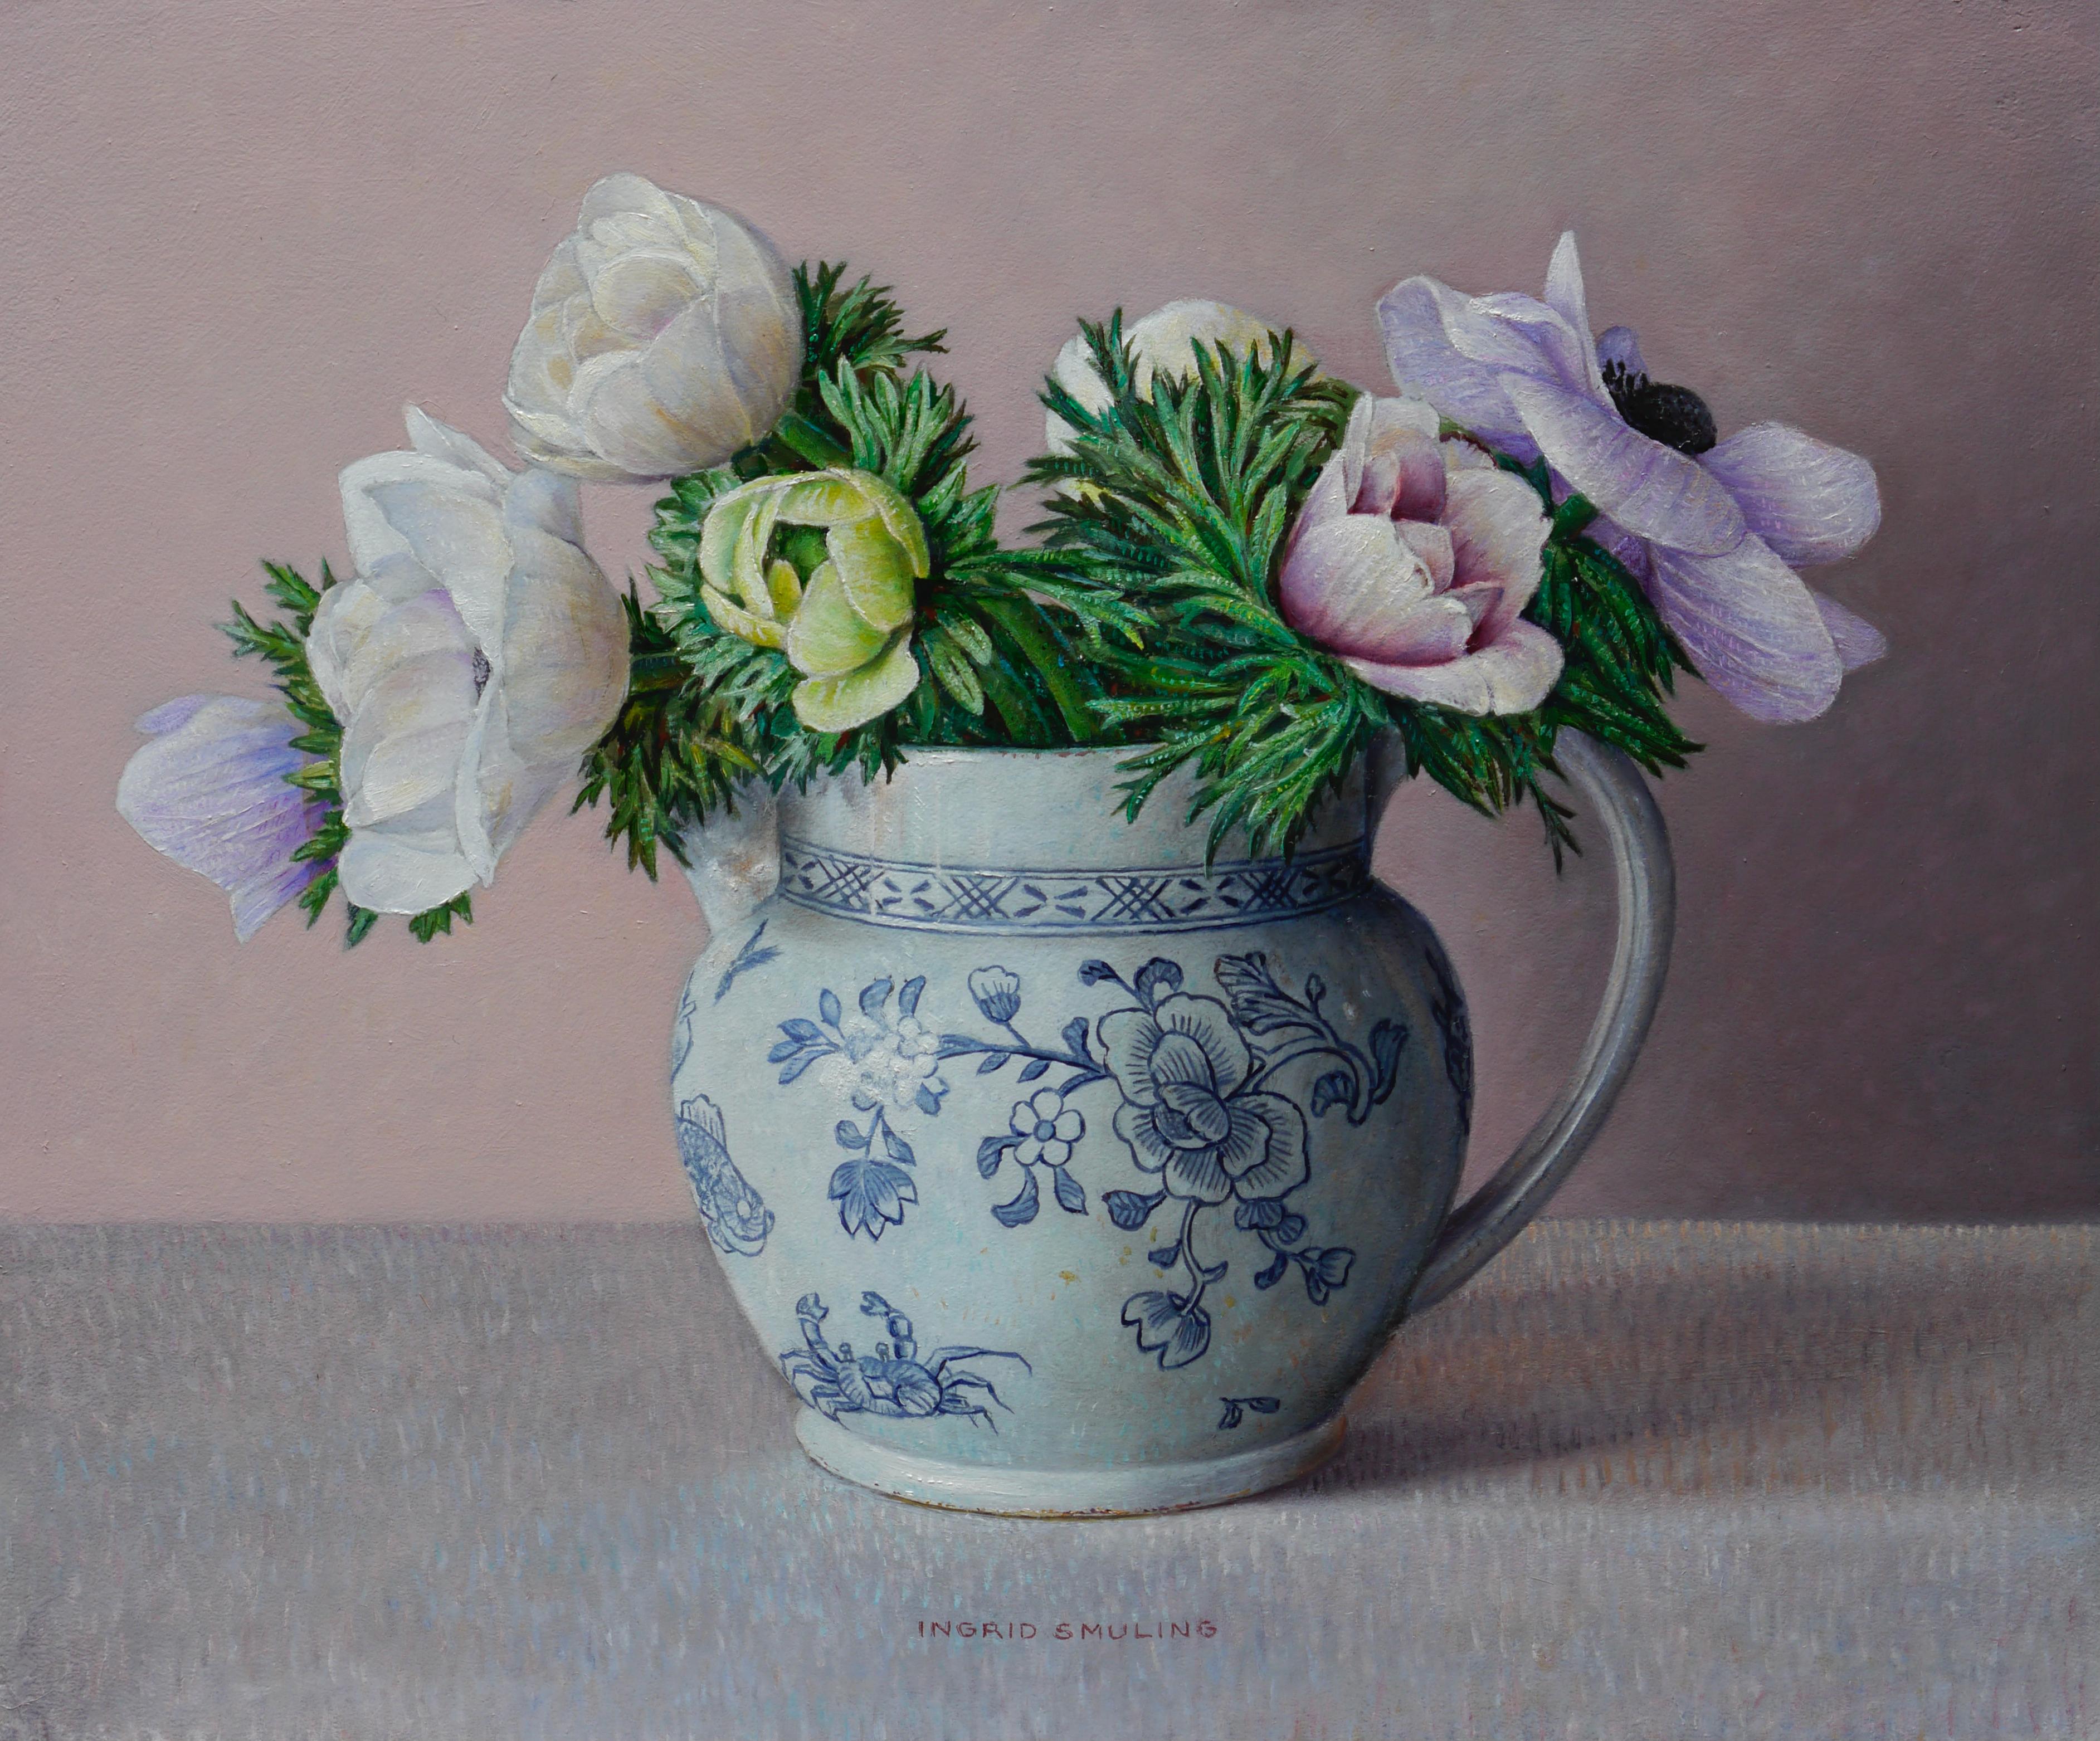 Ingrid Smuling Still-Life Painting - Wedgewood Eturia with Anemones- 21st Century Dutch Still-life painting 